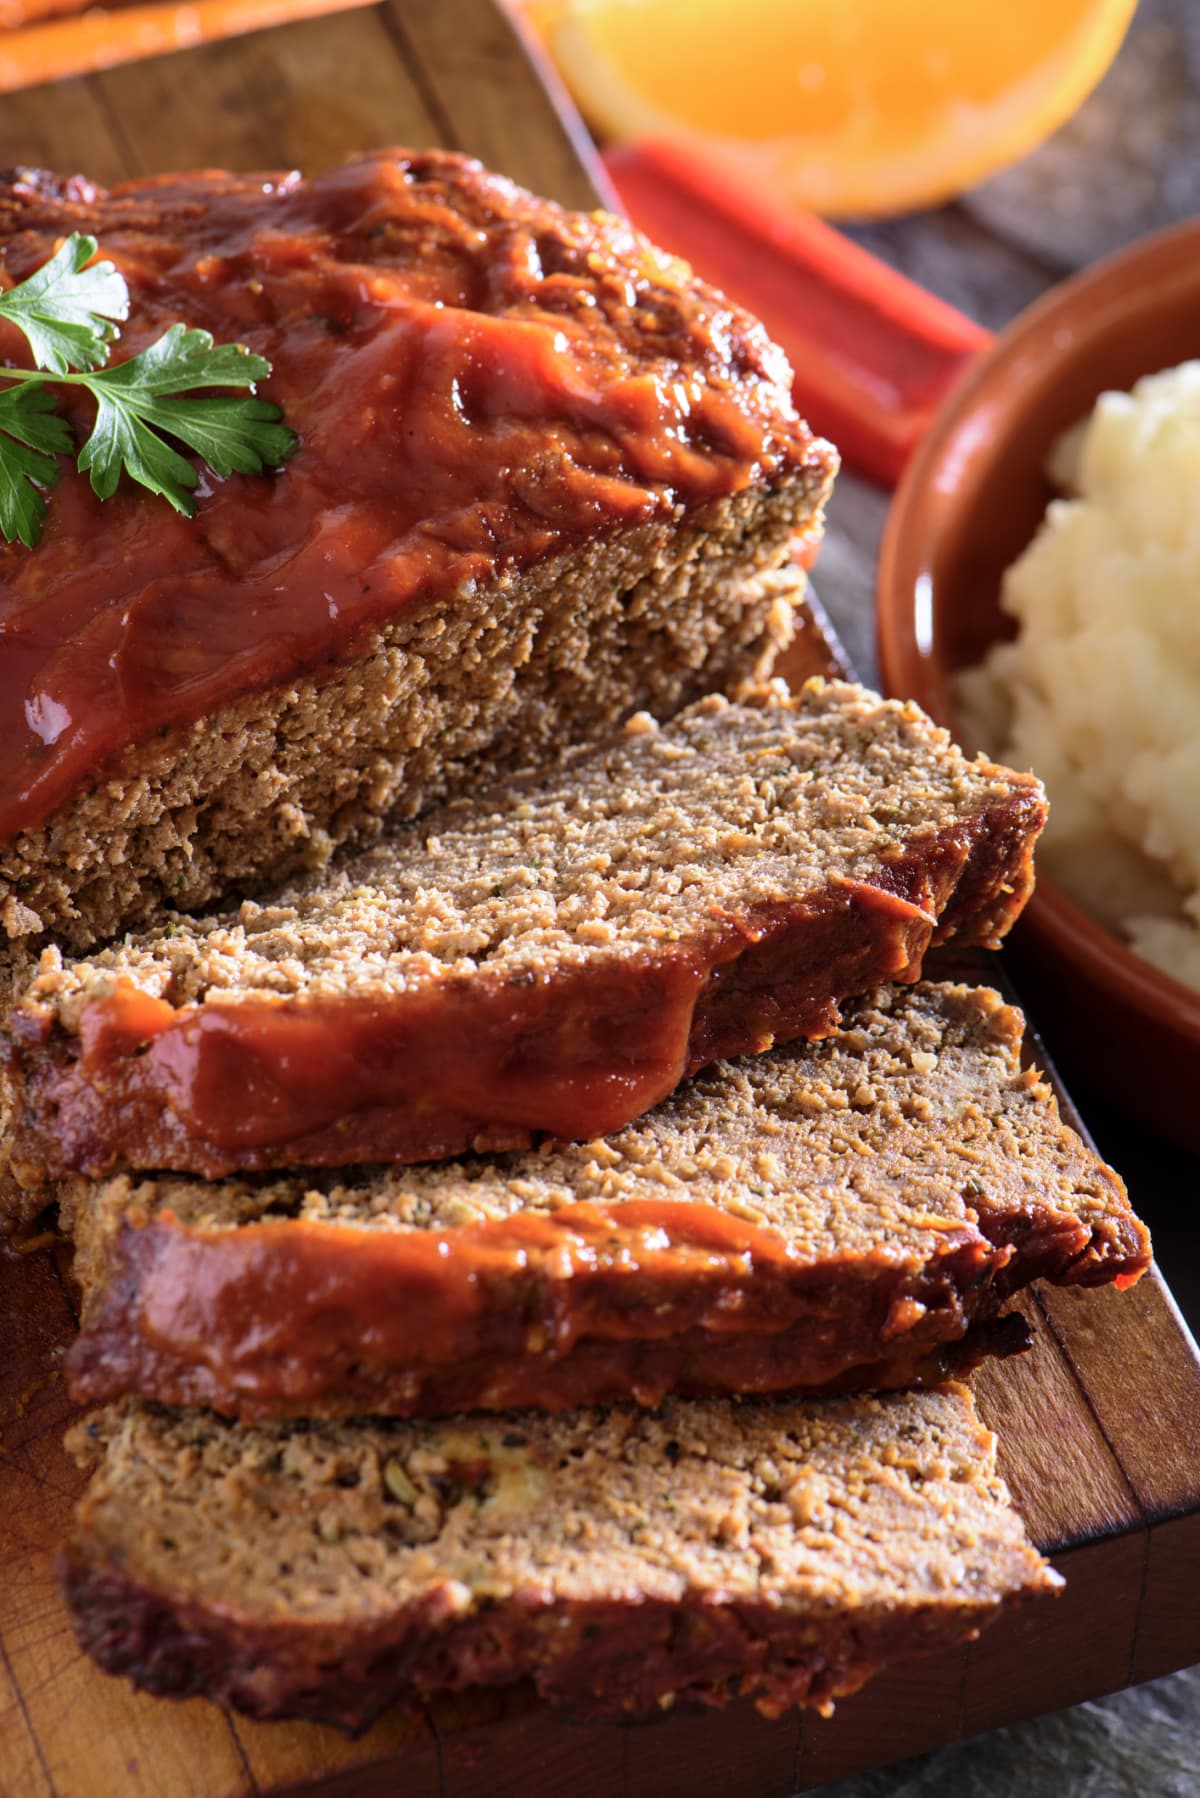 Sliced meatloaf topped with ketchup and fresh herb